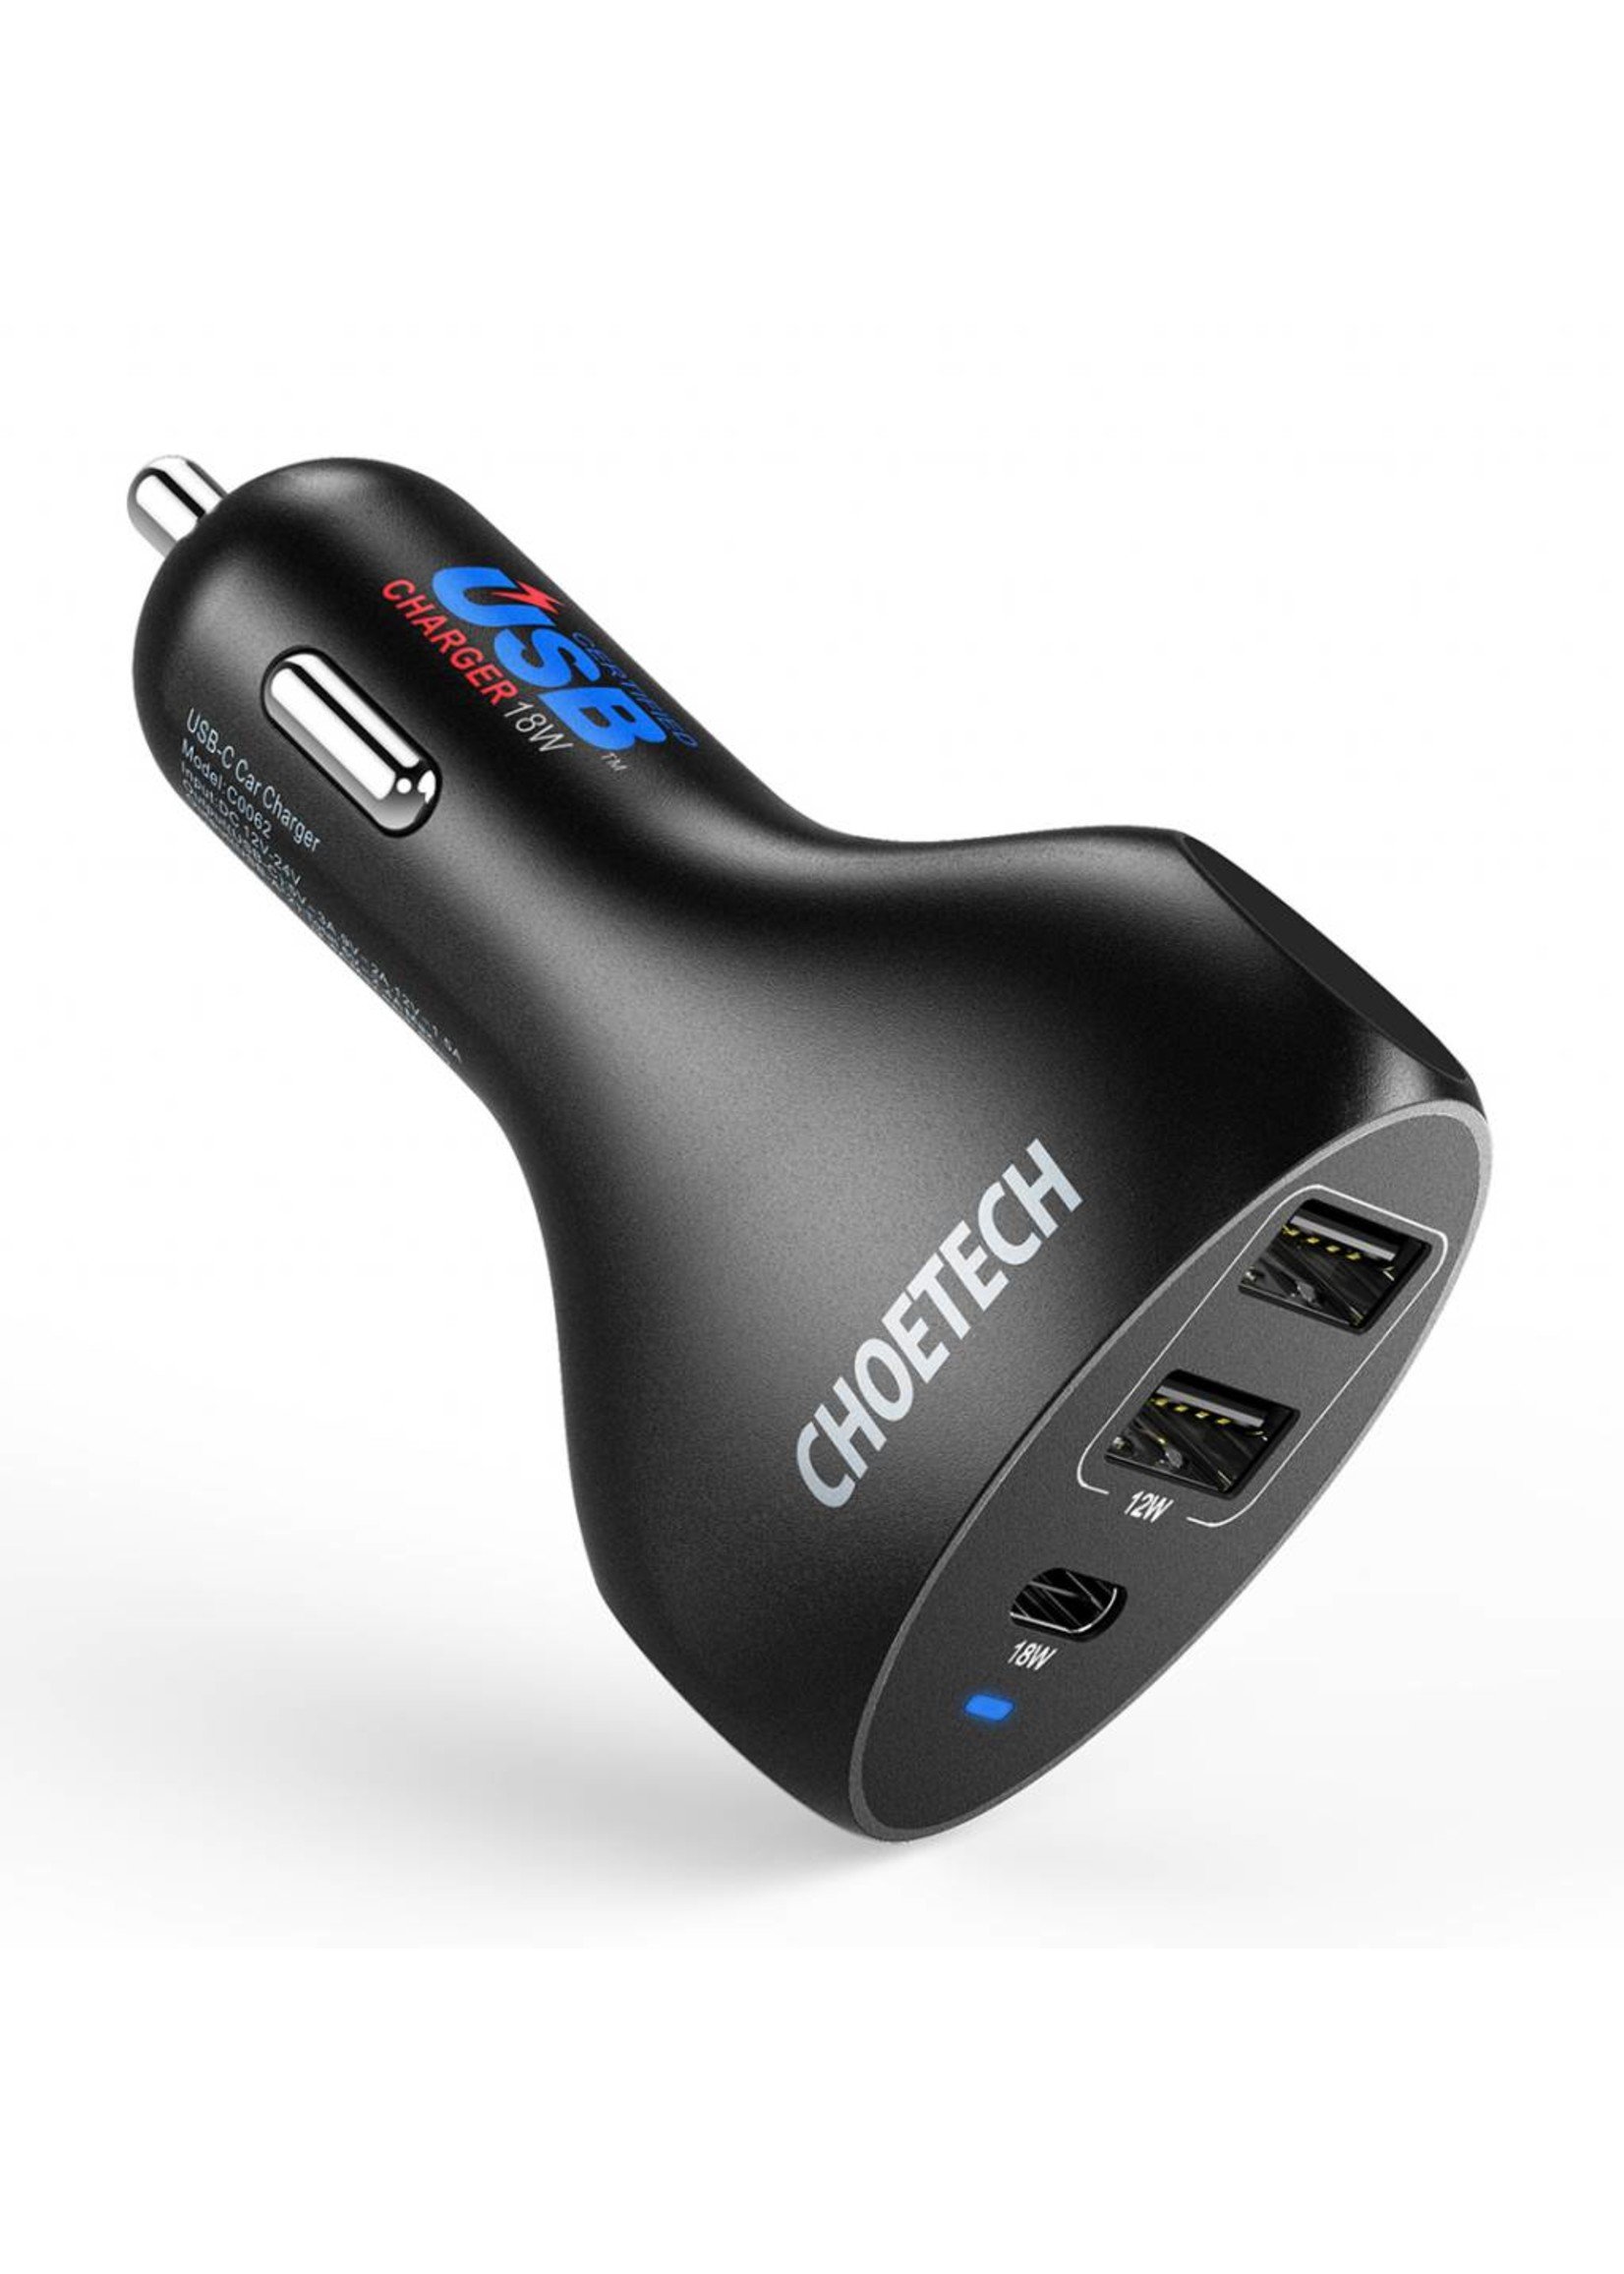 Choetech 3 Port Car Charger with 1x USB-C and 2x USB-A - Power Delivery - 30Watt - 3A - Black